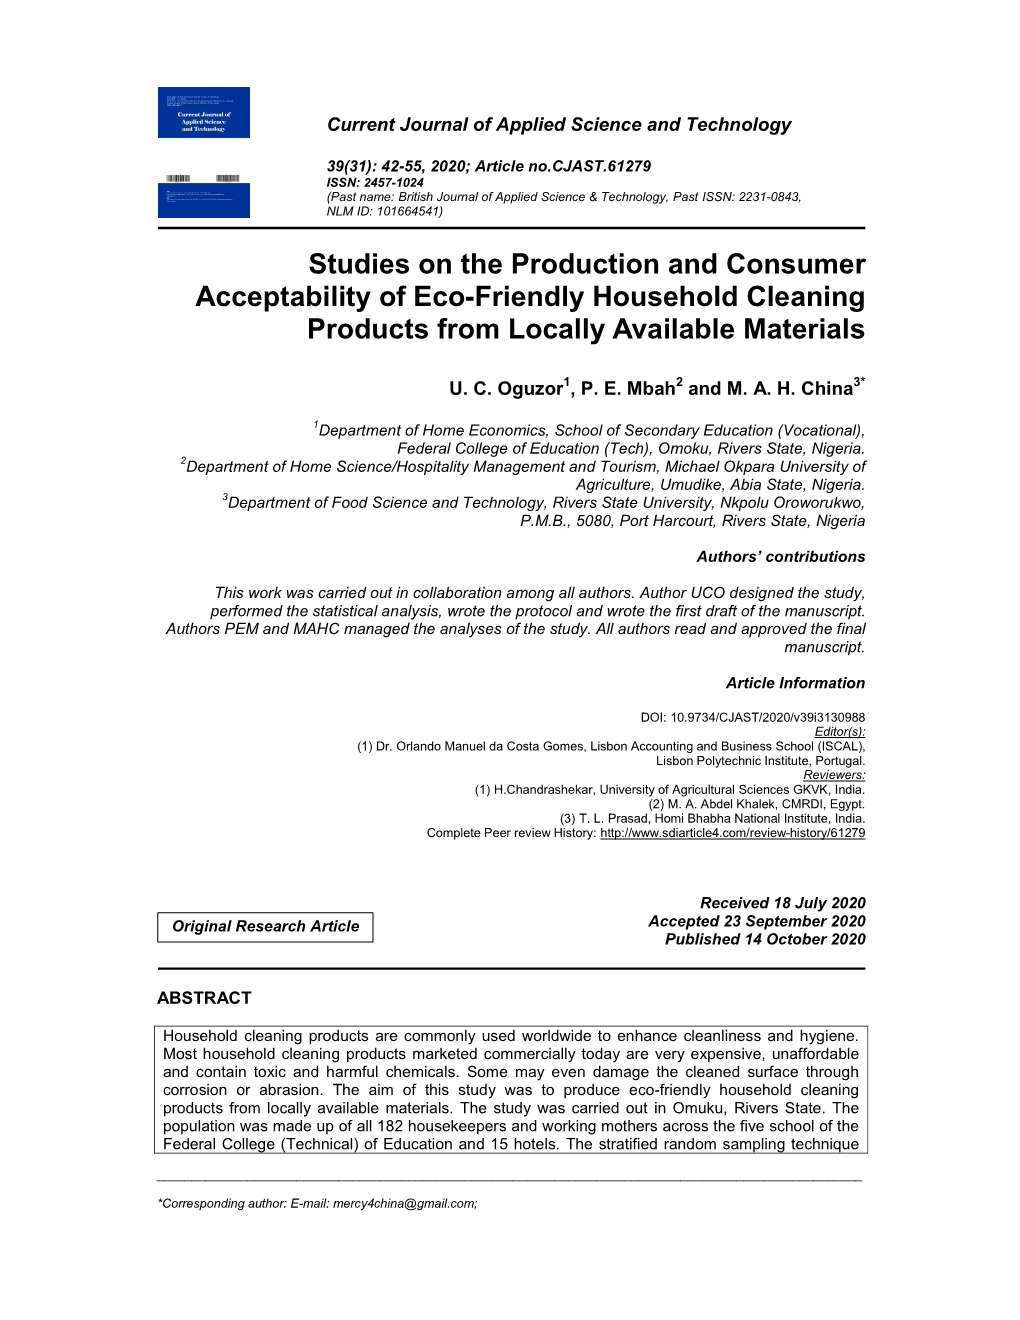 Studies on the Production and Consumer Acceptability of Eco-Friendly Household Cleaning Products from Locally Available Materials